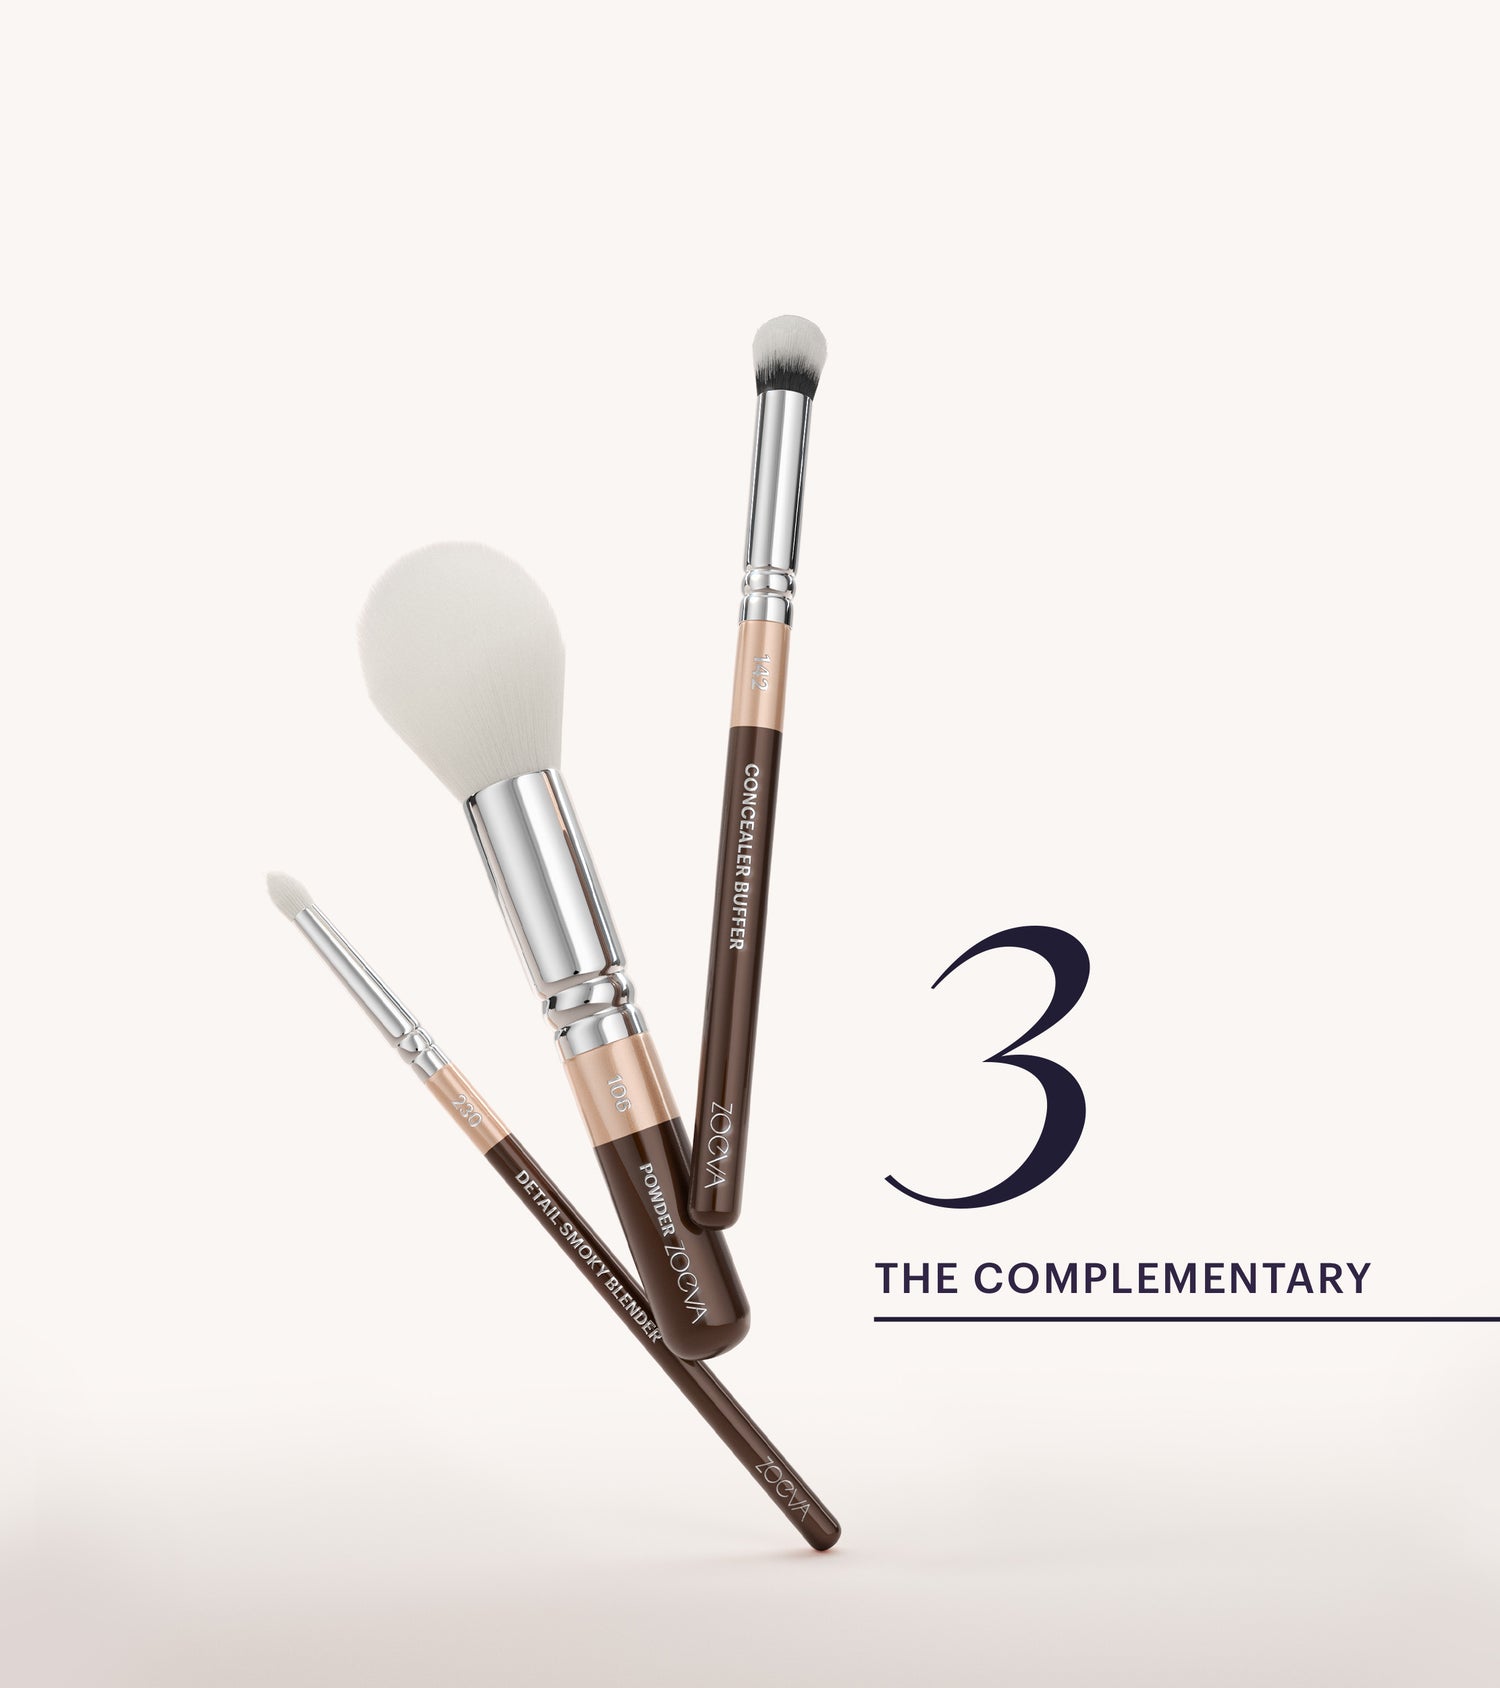 ZOEVA - The Complete Pinselset & Shoulder Strap (CHOCOLATE) - BRUSH SET